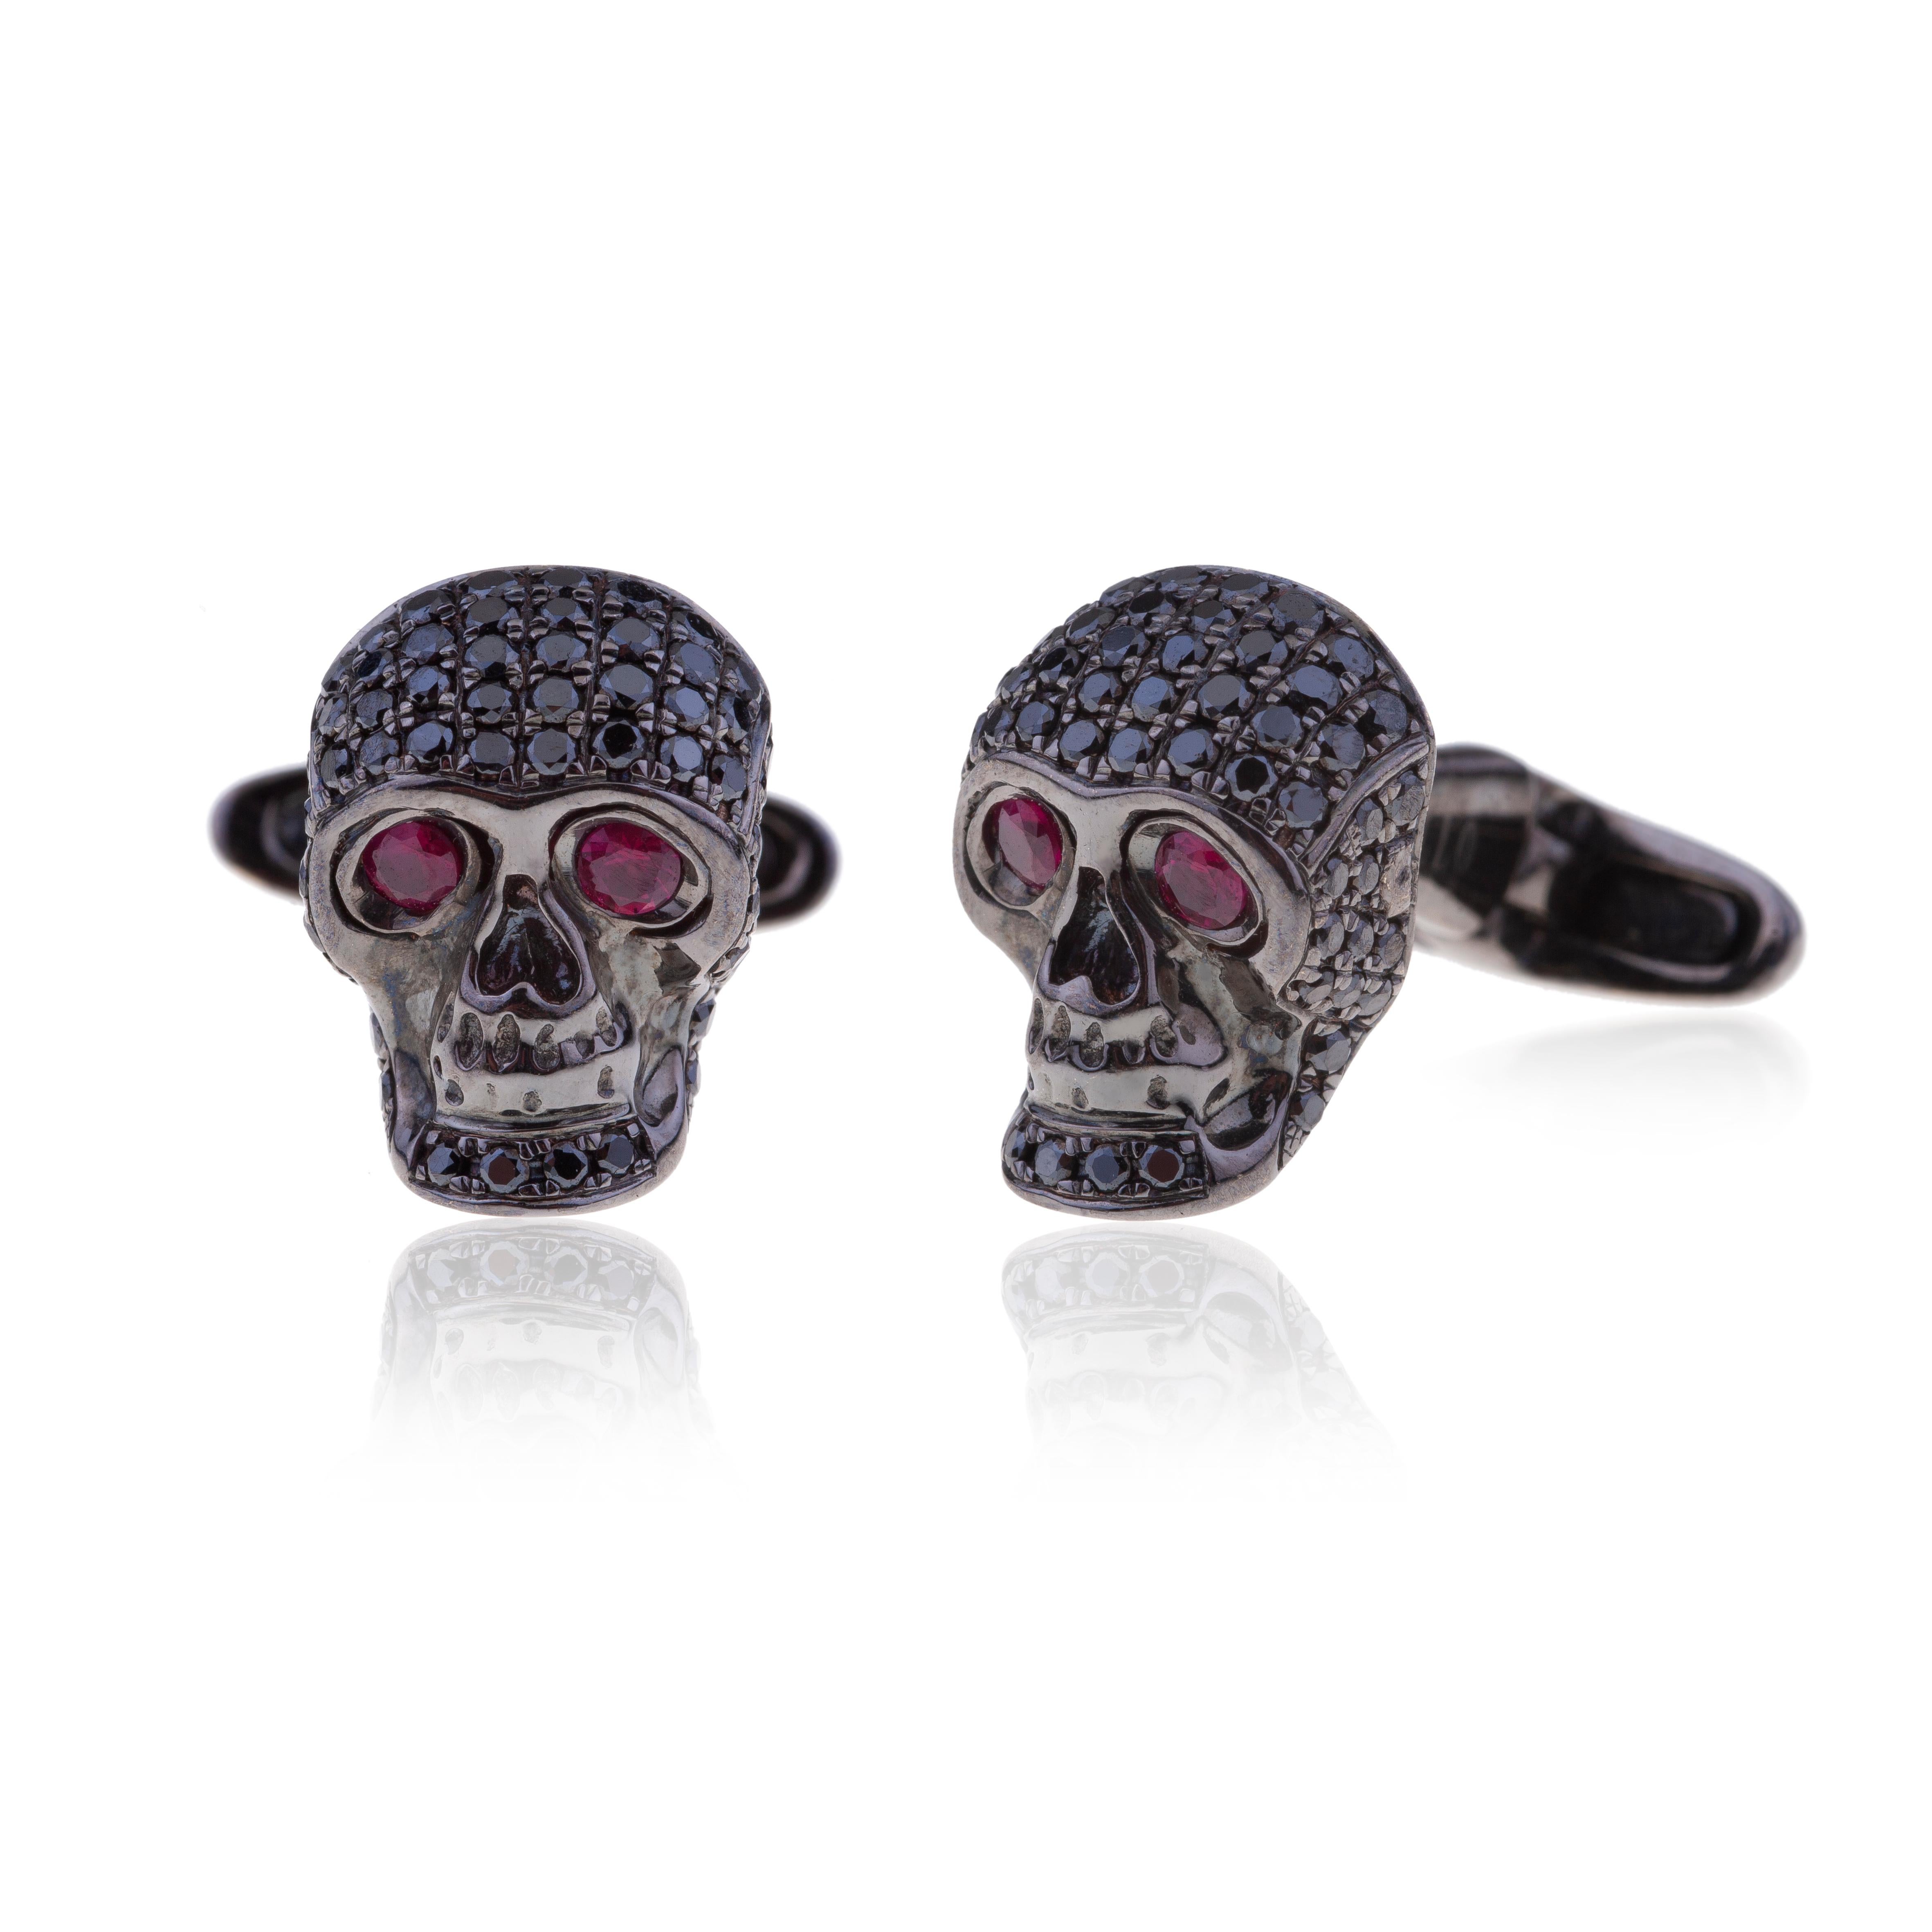 Cufflinks Black Gold from Gavello Featuring a Skull Head Black Diamonds & Ruby.
Unisex Cufflinks Suitable to Many Different Outfit.  Unique Desing by Gavello.  
The Skull Head Front is Manufactured in Gold 18kt with a Pave of Black Diamonds and the